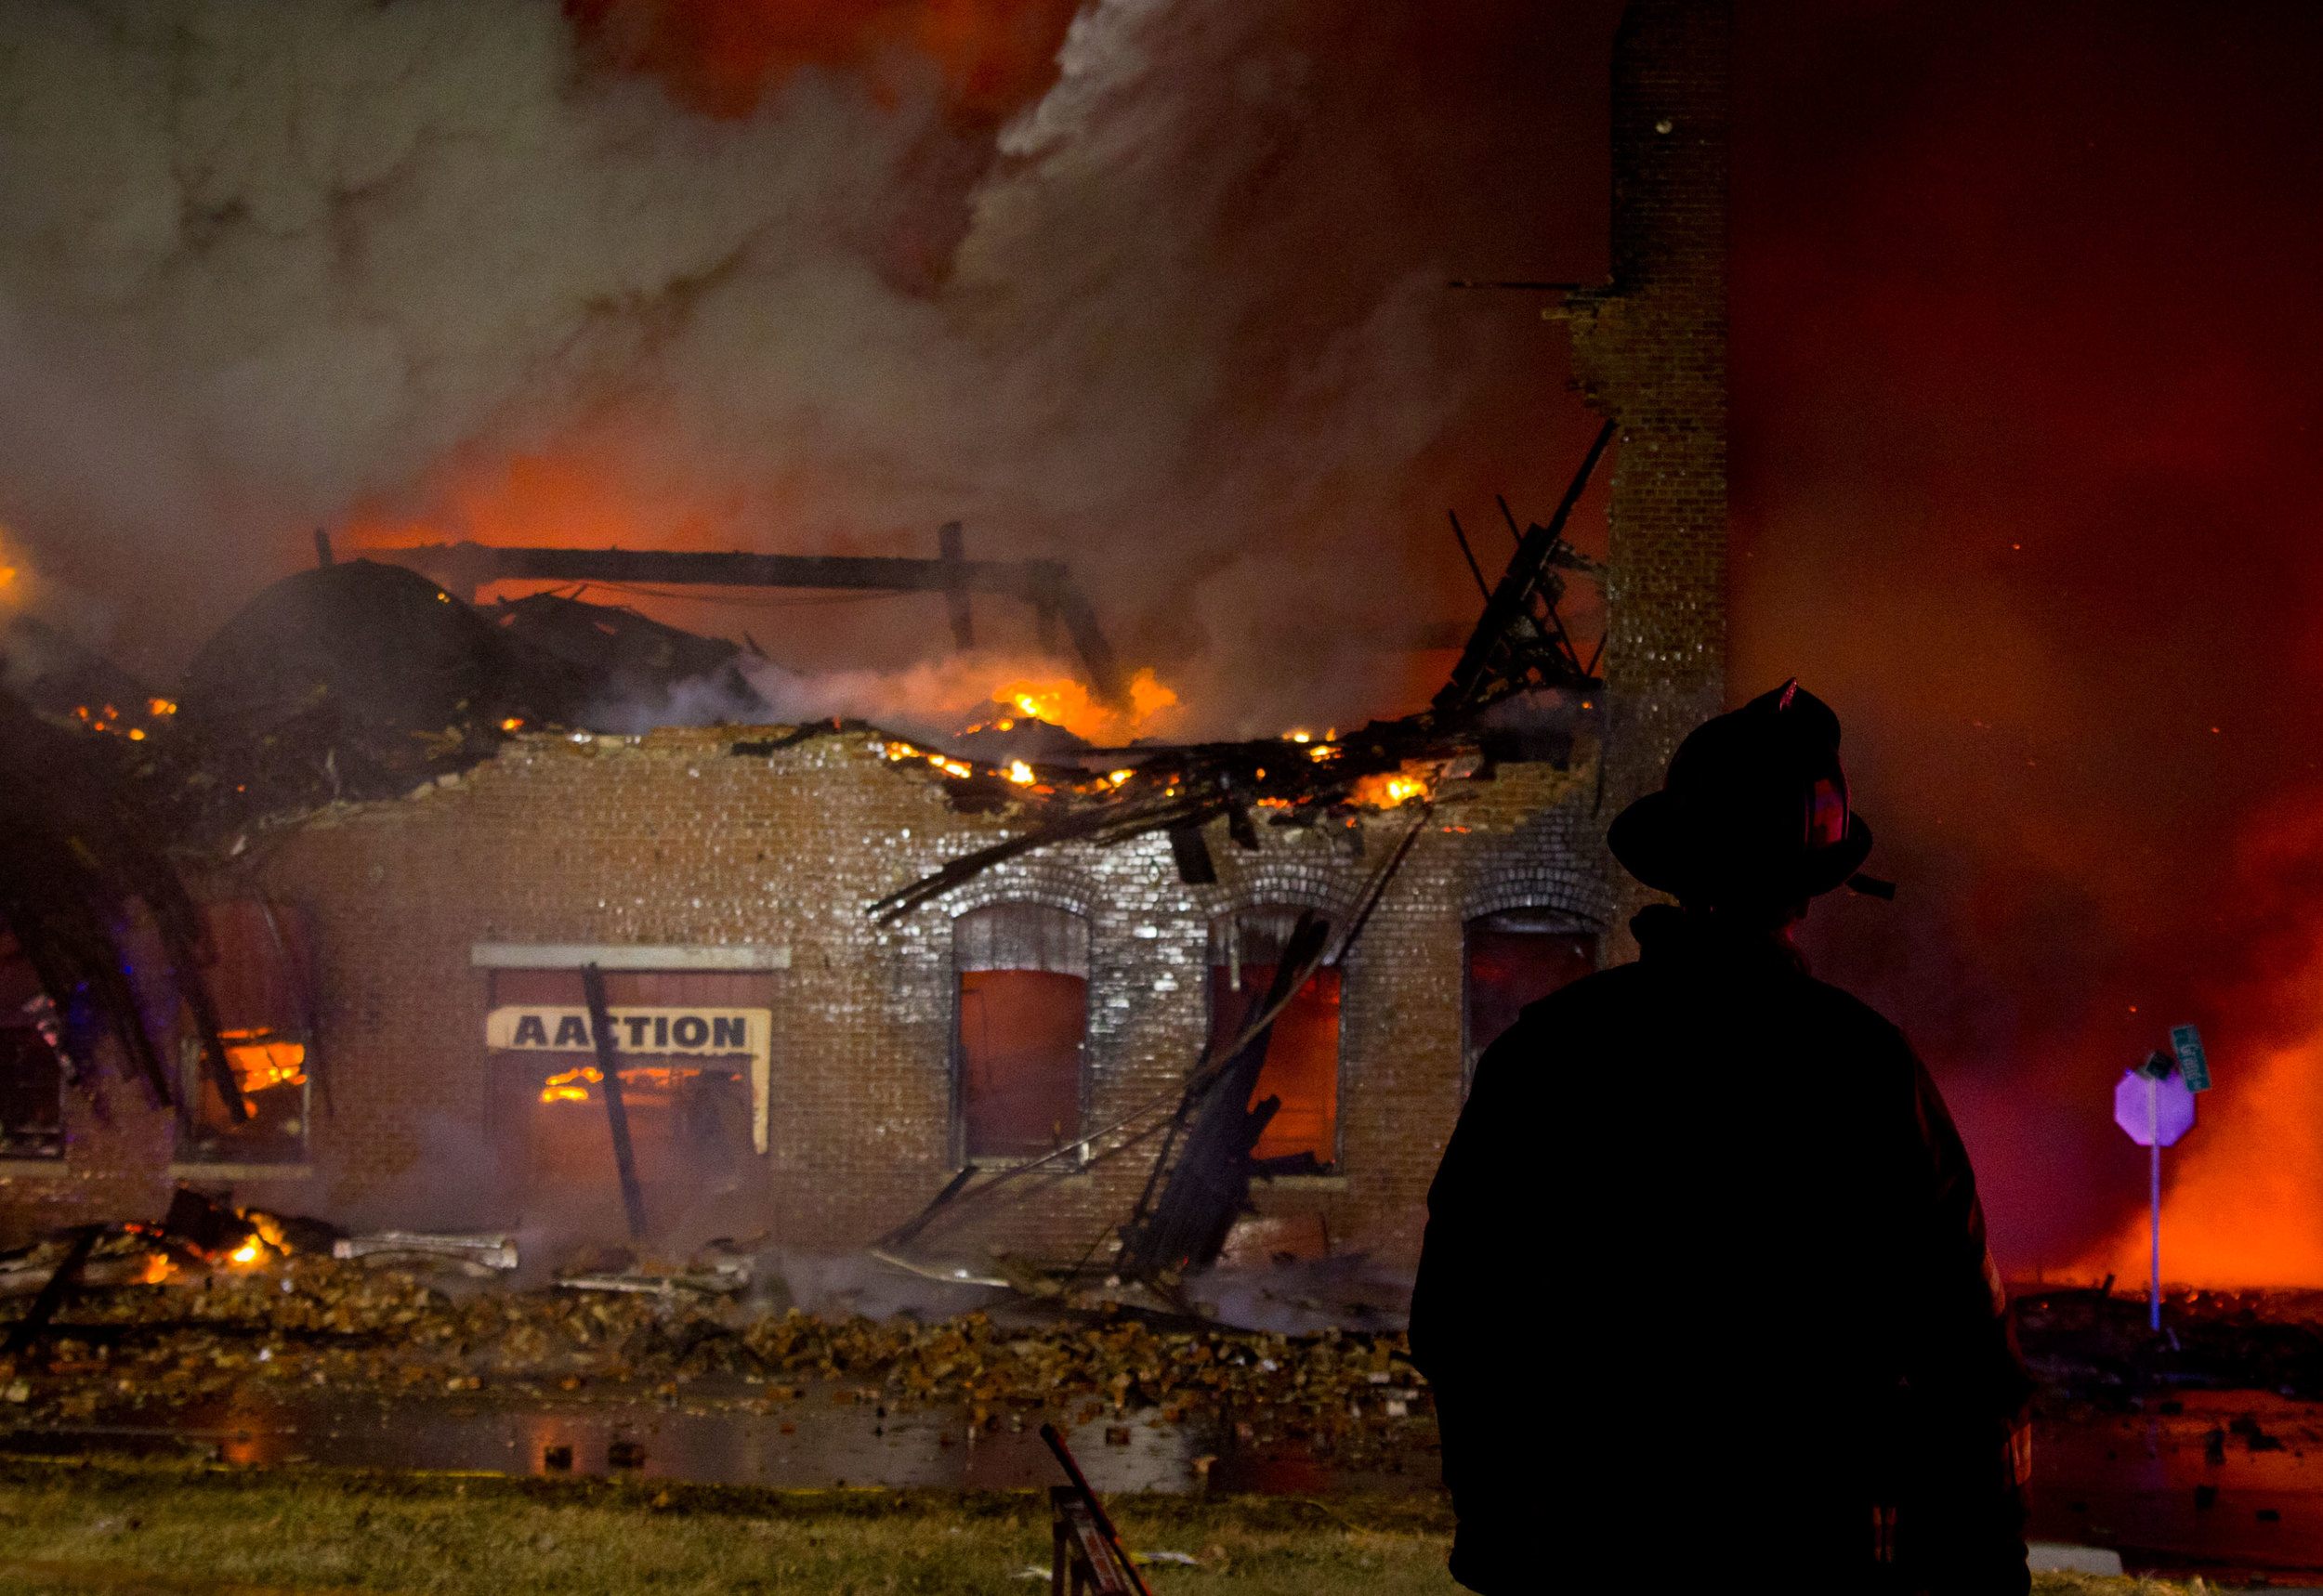  (January 20, 2015) A Decatur firefighter watches as a fire rages on at the Aaction Warehouse Tuesday night. Firefighters were unable to save the building, but were able to prevent damage to neighboring homes. 